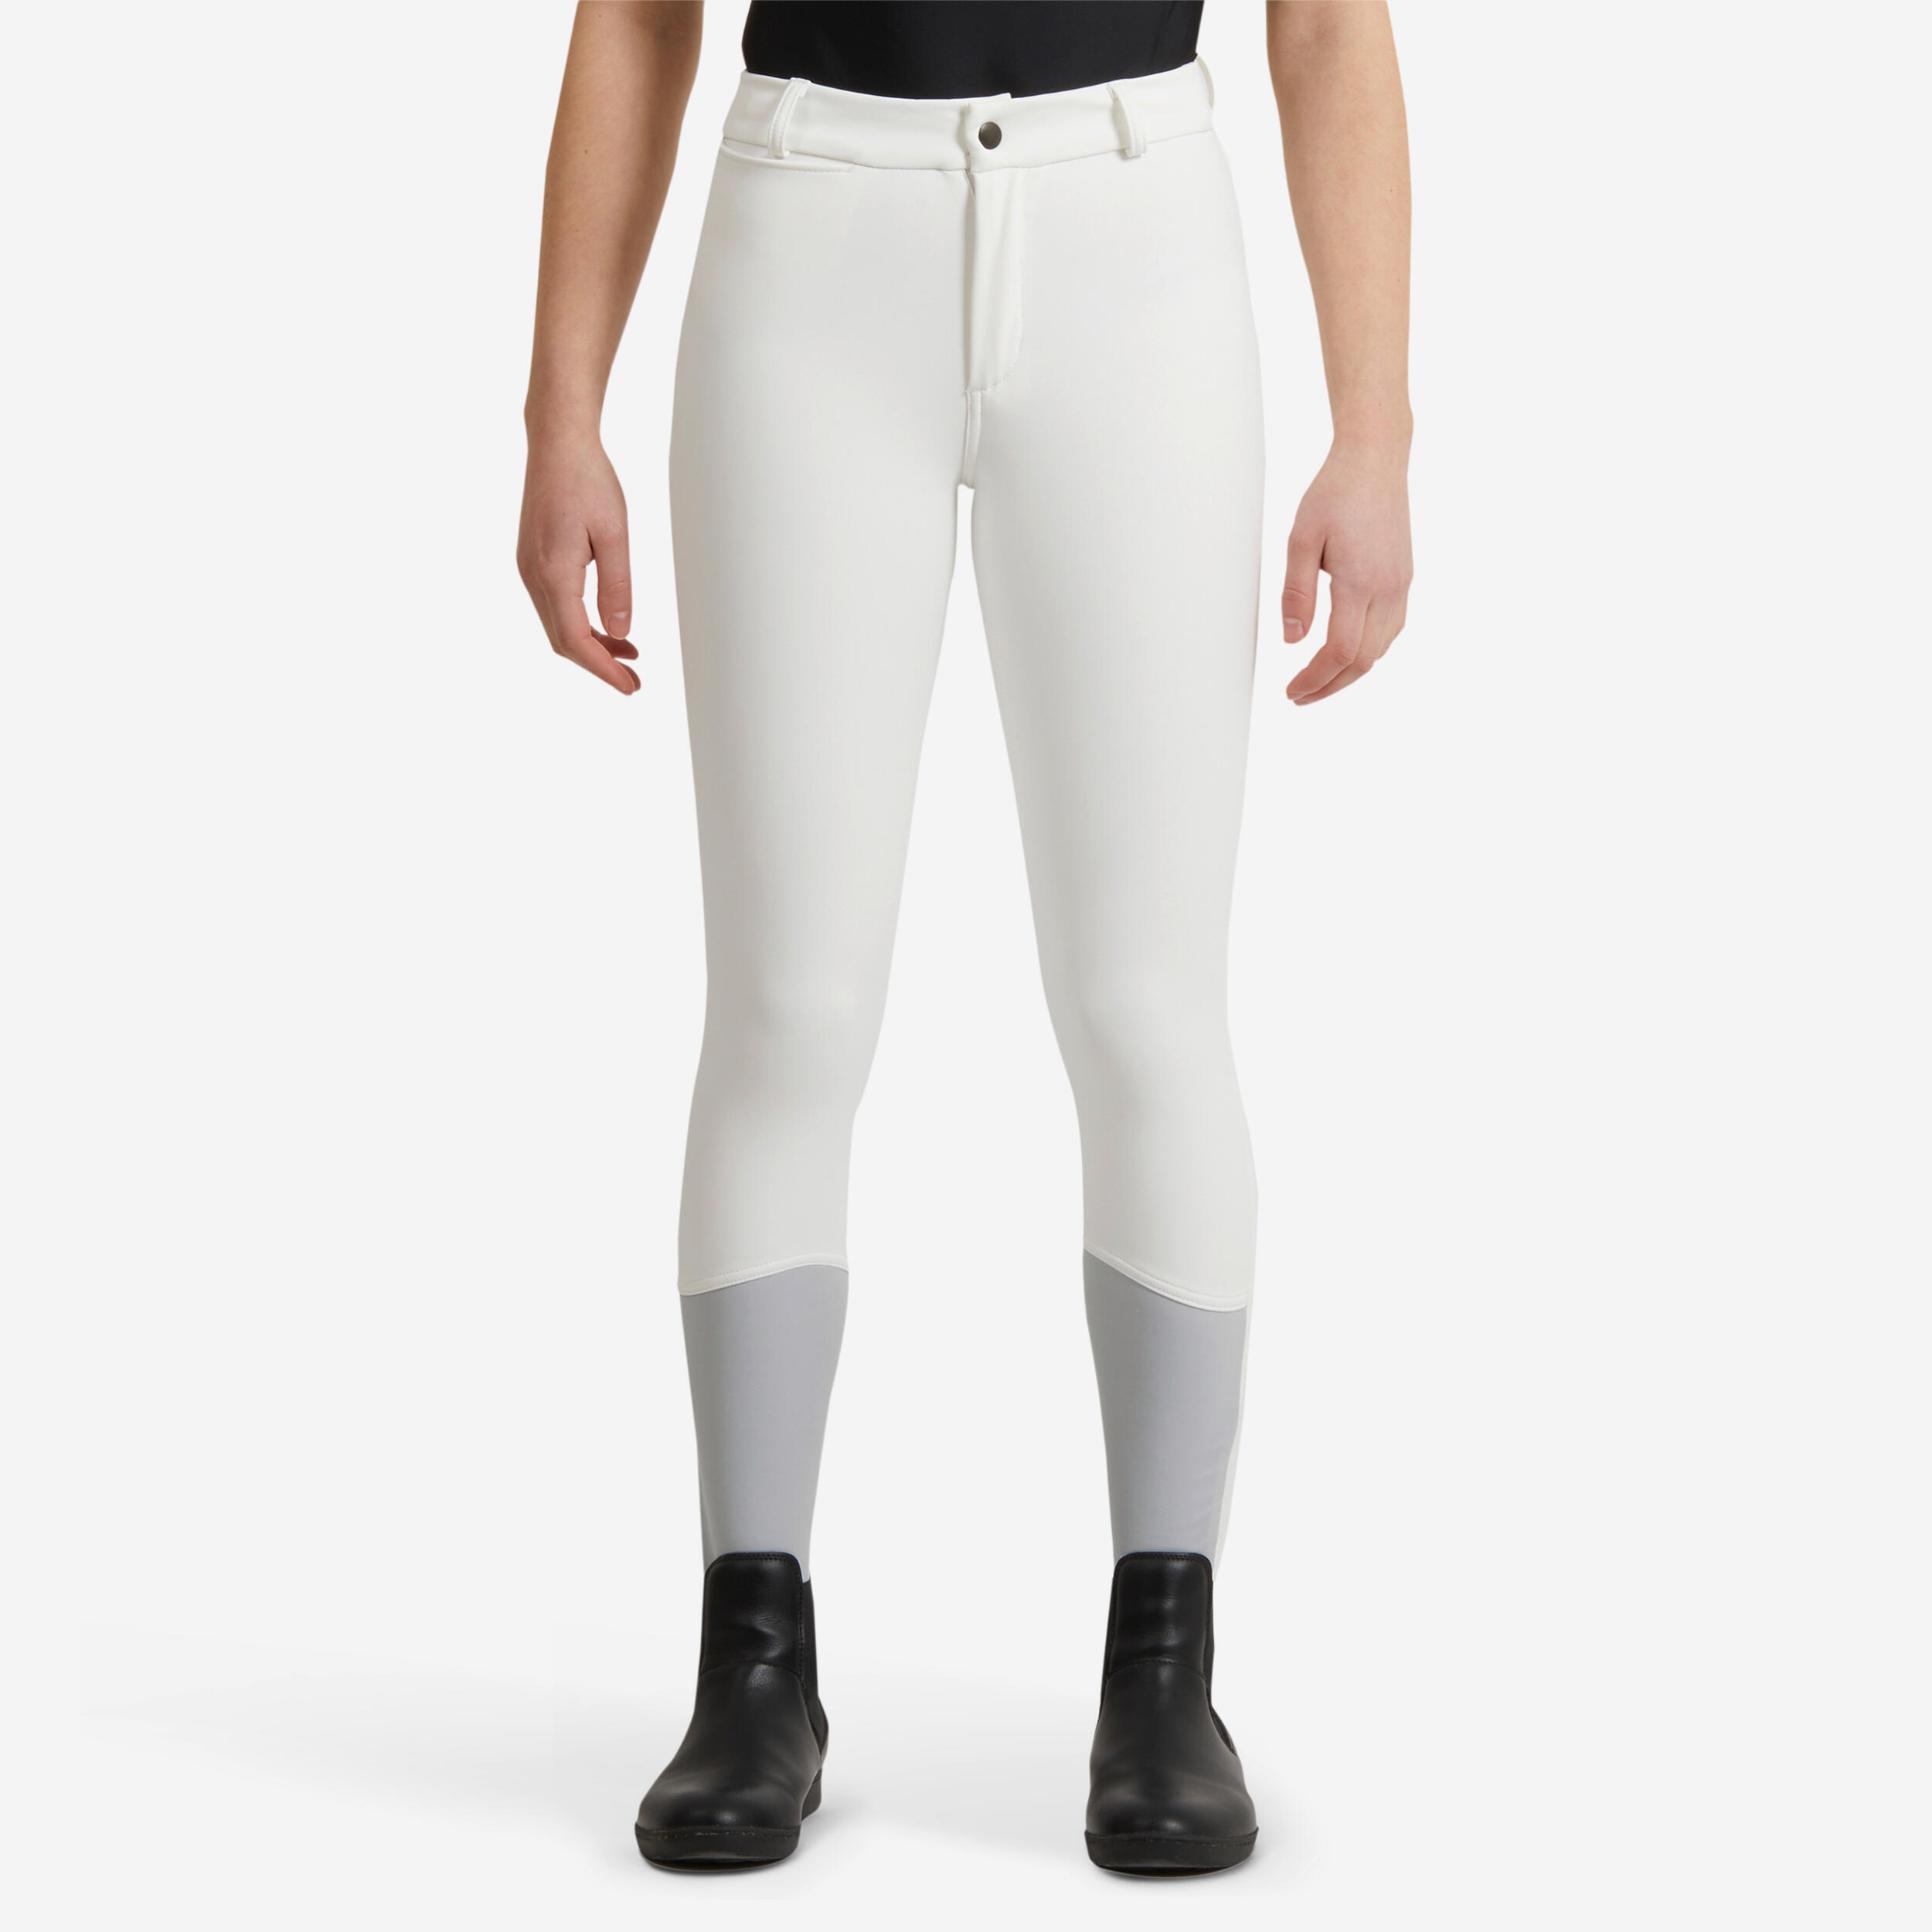 FOUGANZA Kids' Horse Riding Warm and Water Repellent Competition Jodhpurs 500 Kipwarm - White